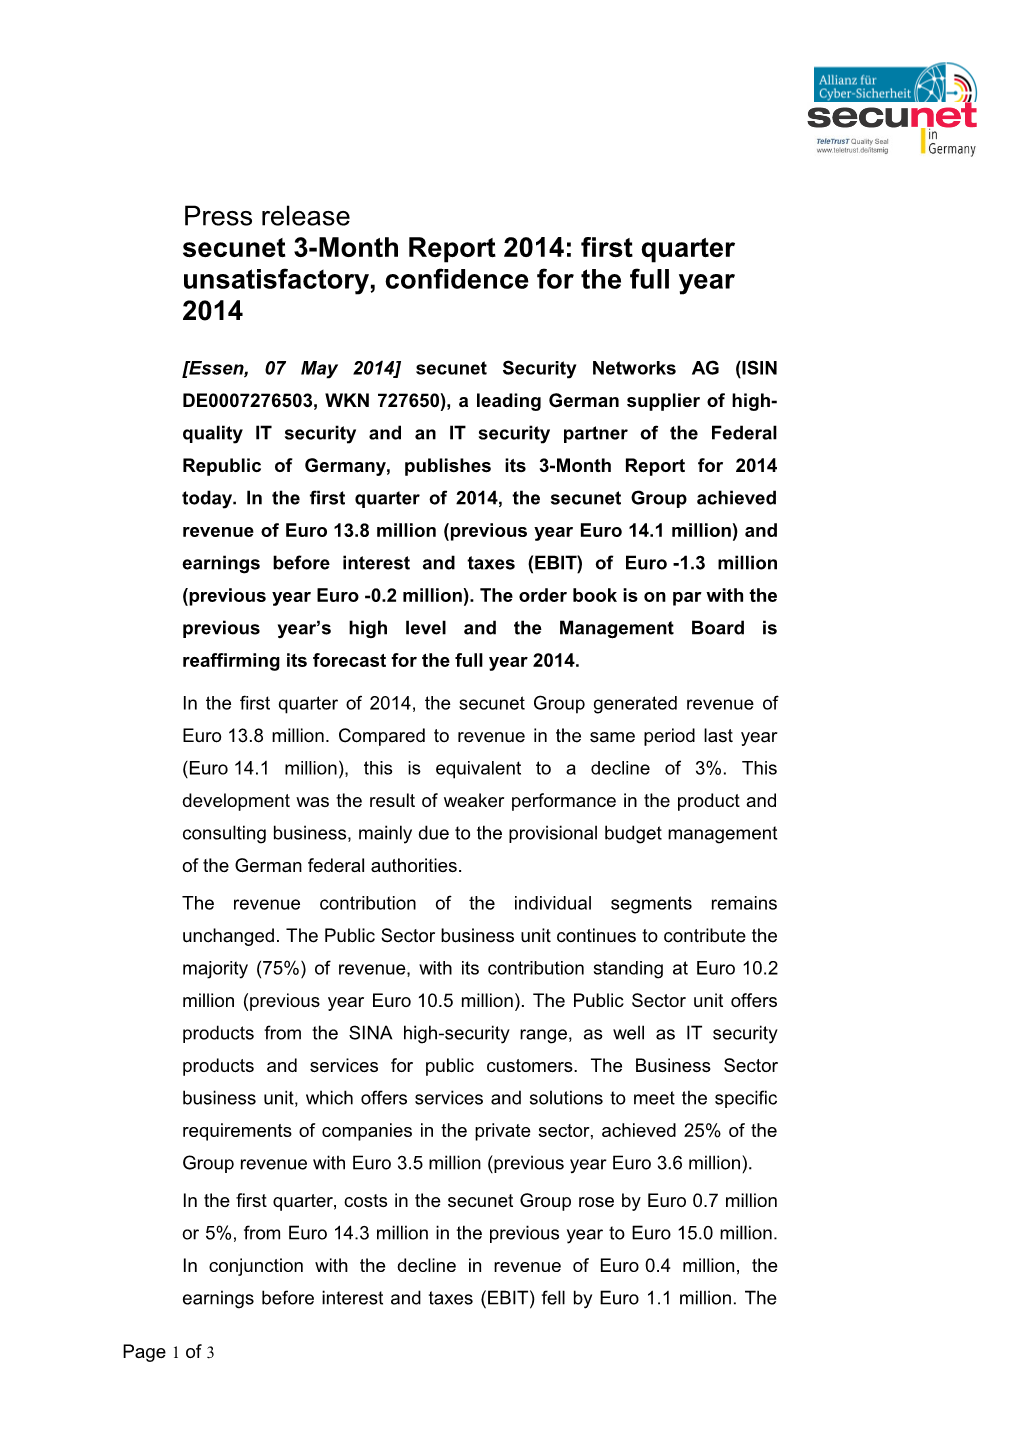 Secunet 3-Month Report 2014: First Quarter Unsatisfactory, Confidence for the Full Year 2014